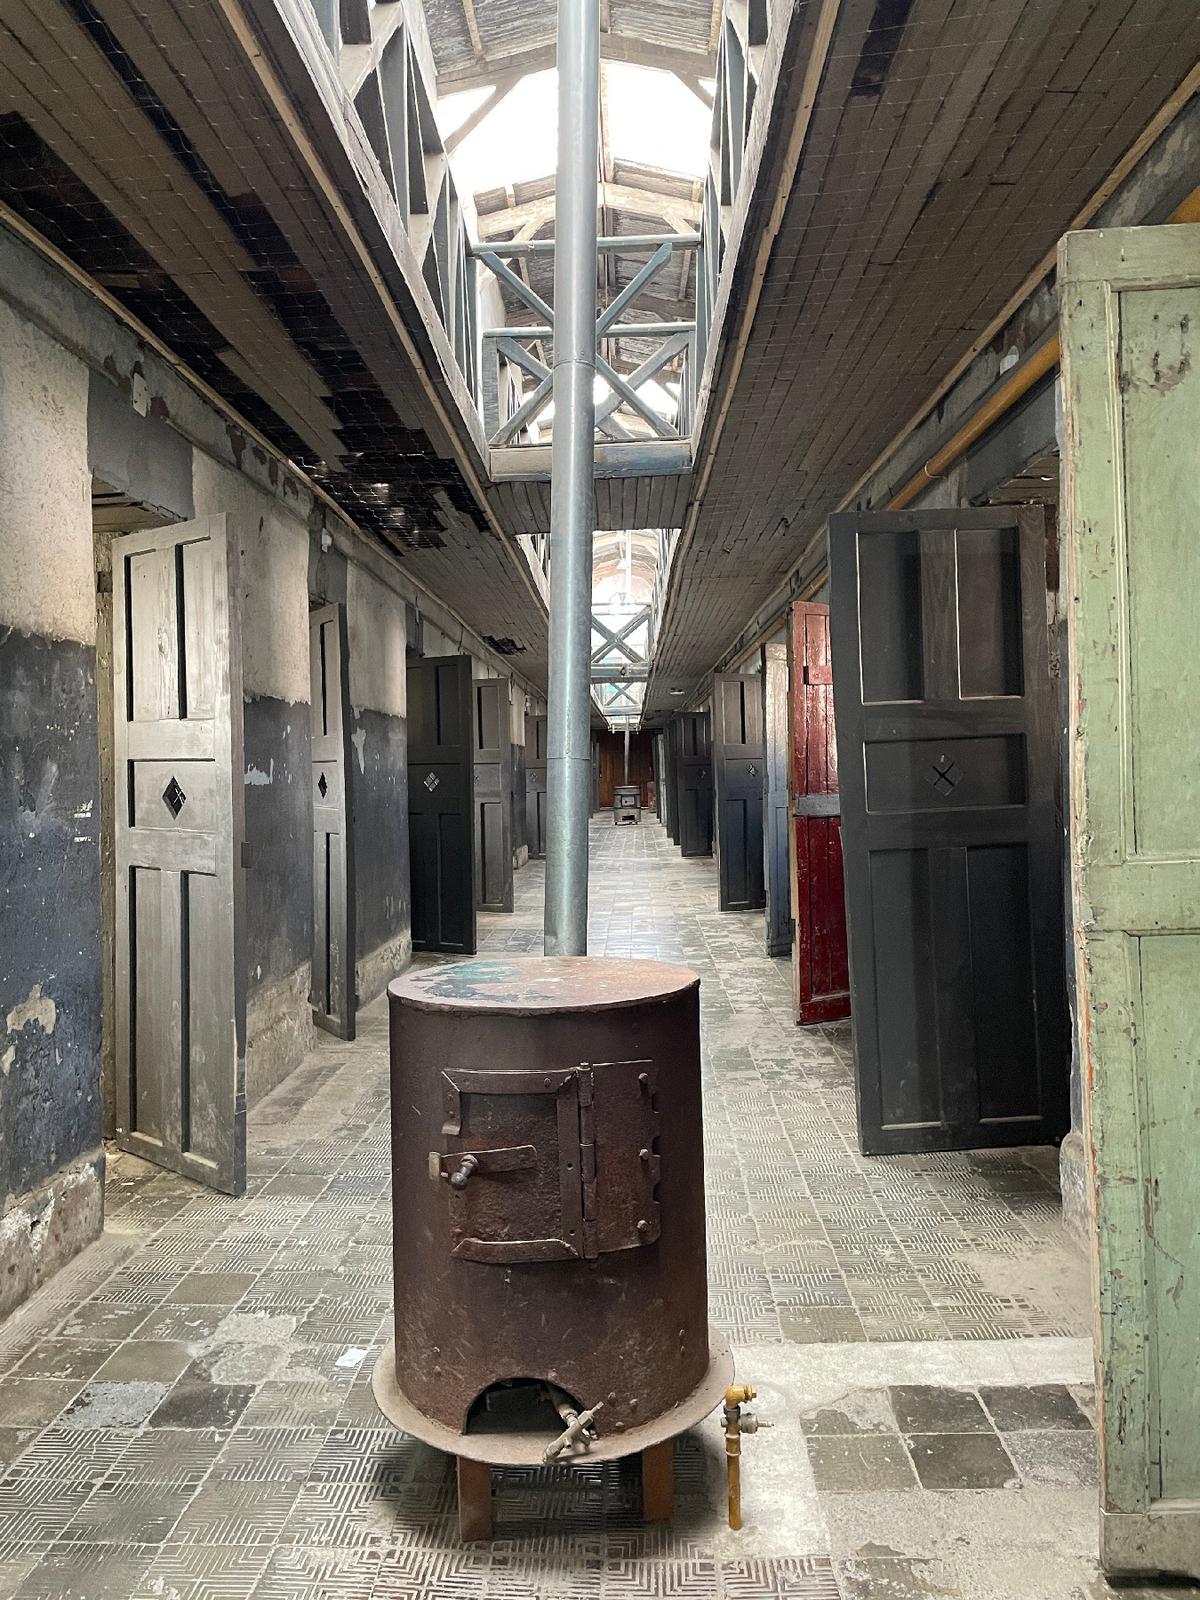 Some 386 individual cells housed up to 600 of Argentina’s most dangerous criminals in Ushuaia between 1902 and 1947. (Courtesy of Lesley Frederikson)